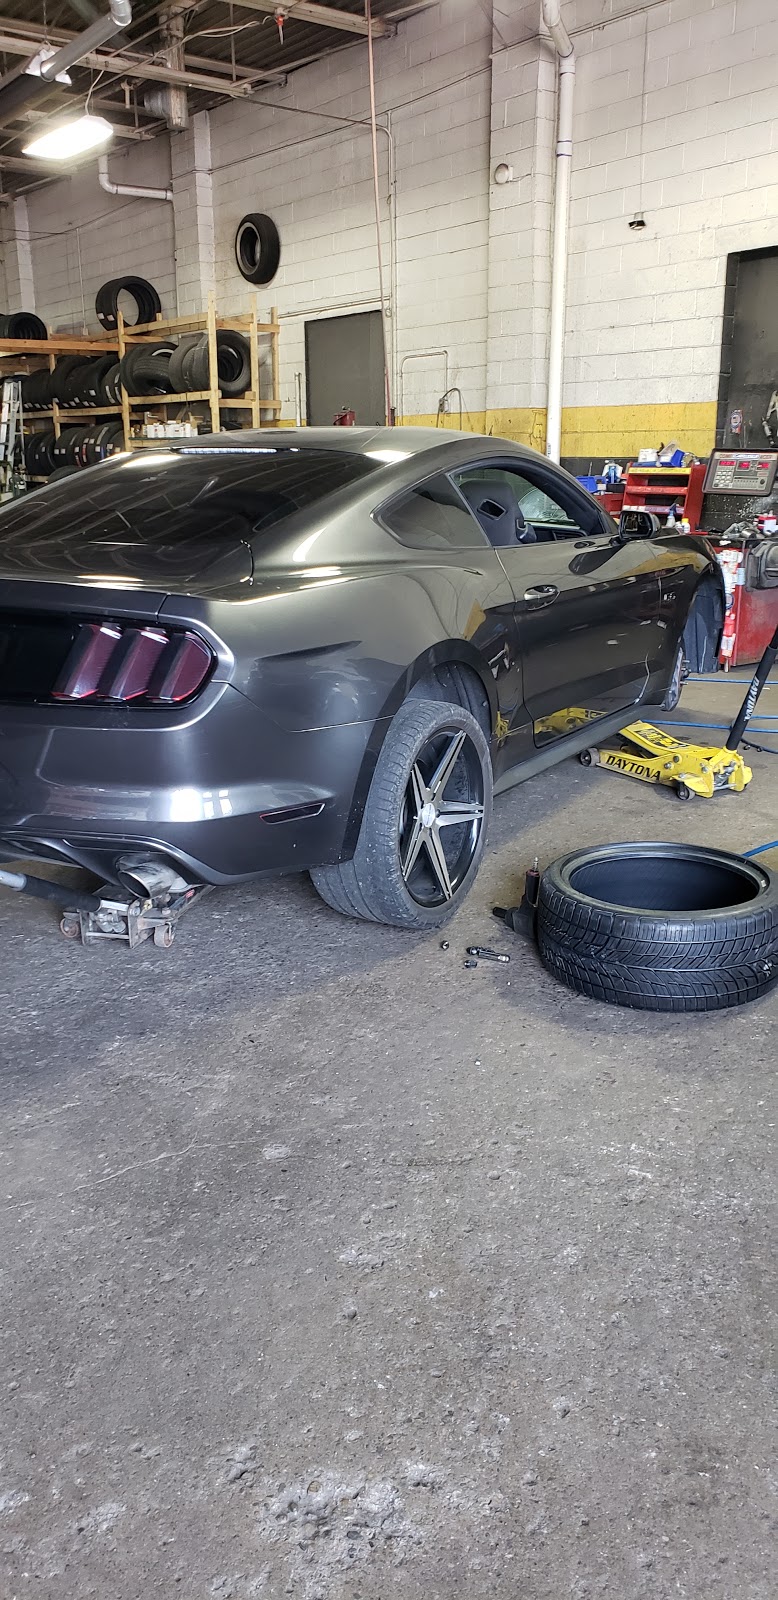 Uncle Kens Tires Unlimited | 15704 Telegraph Rd, Redford Charter Twp, MI 48239 | Phone: (313) 541-1500